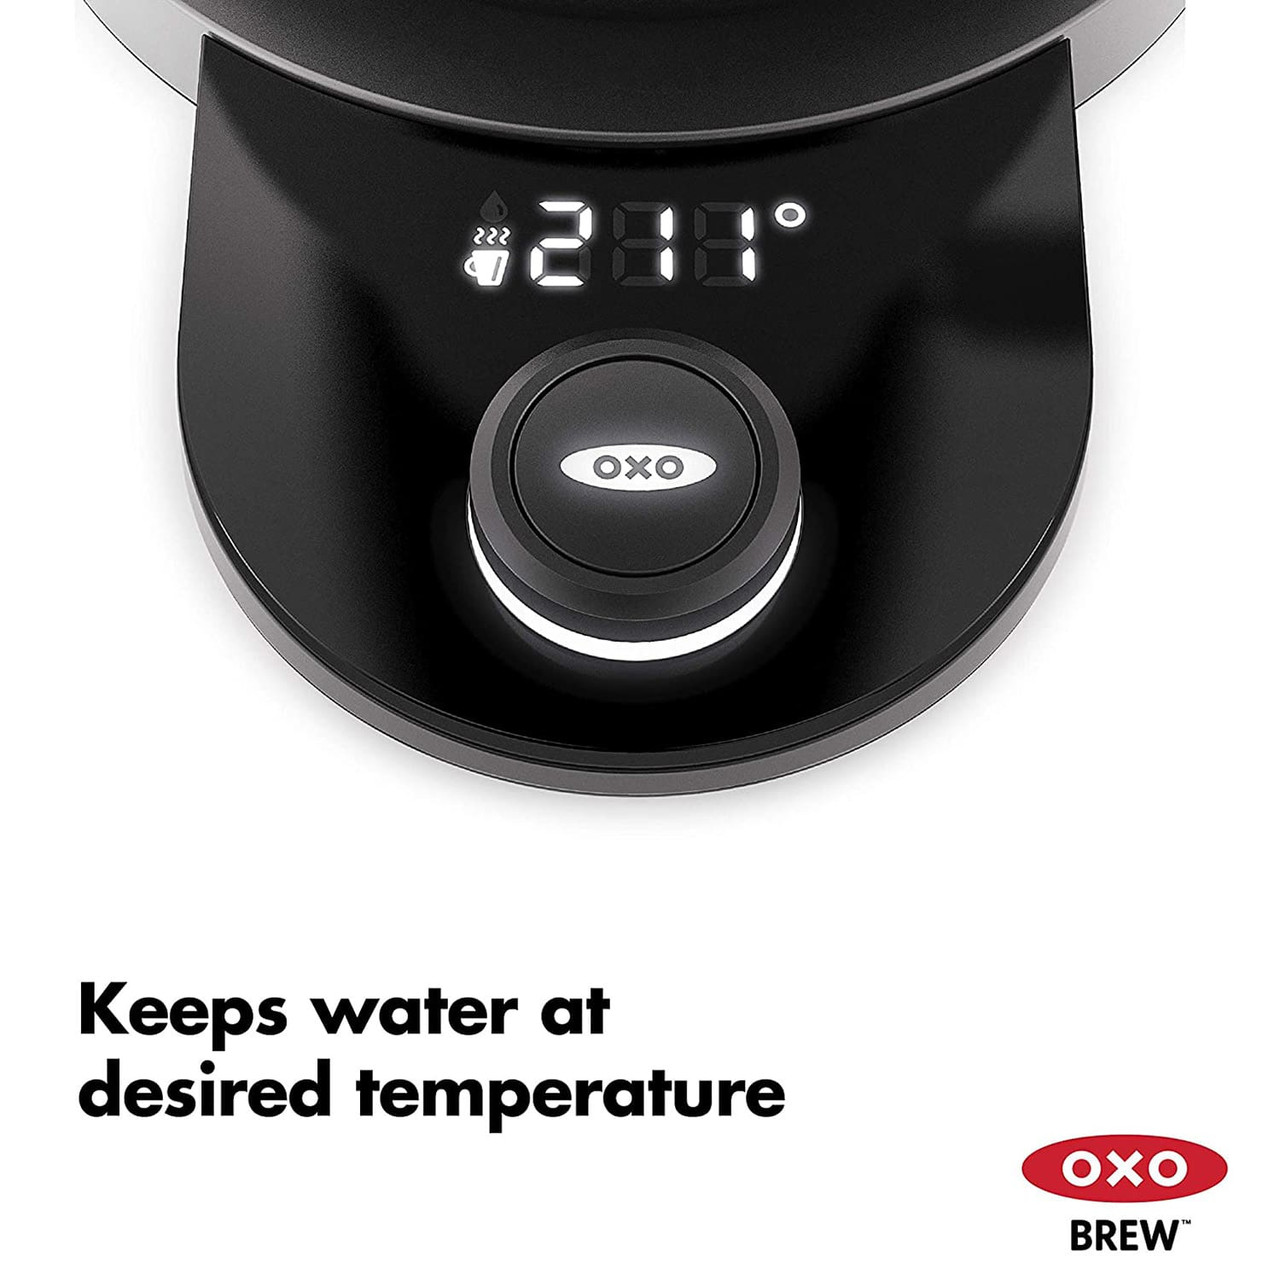 OXO BREW Black Stainless Steel Adjustable Temperature Kettle